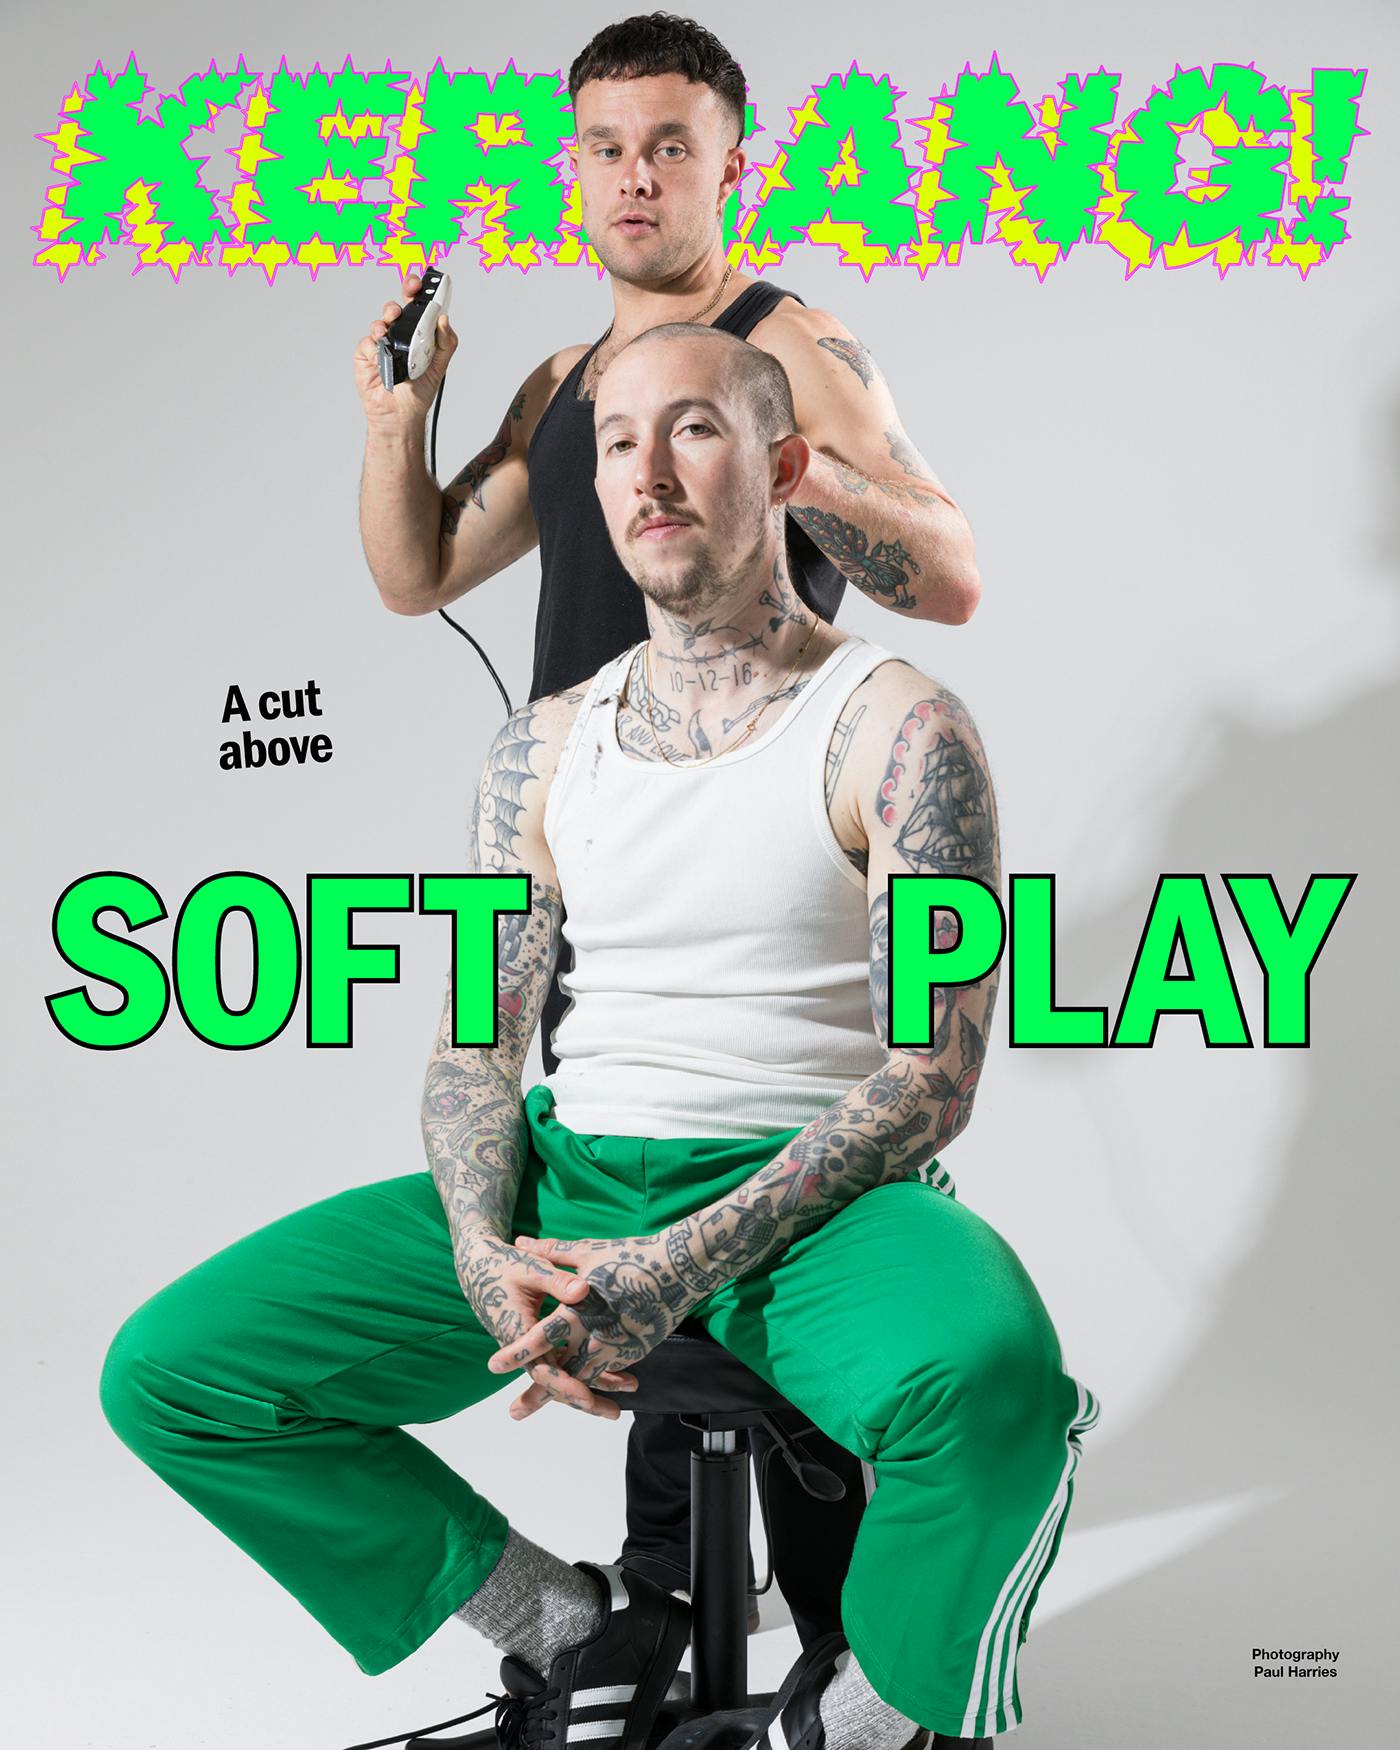 SOFT PLAY: “We need to do this together… the magic of our band is both of us”